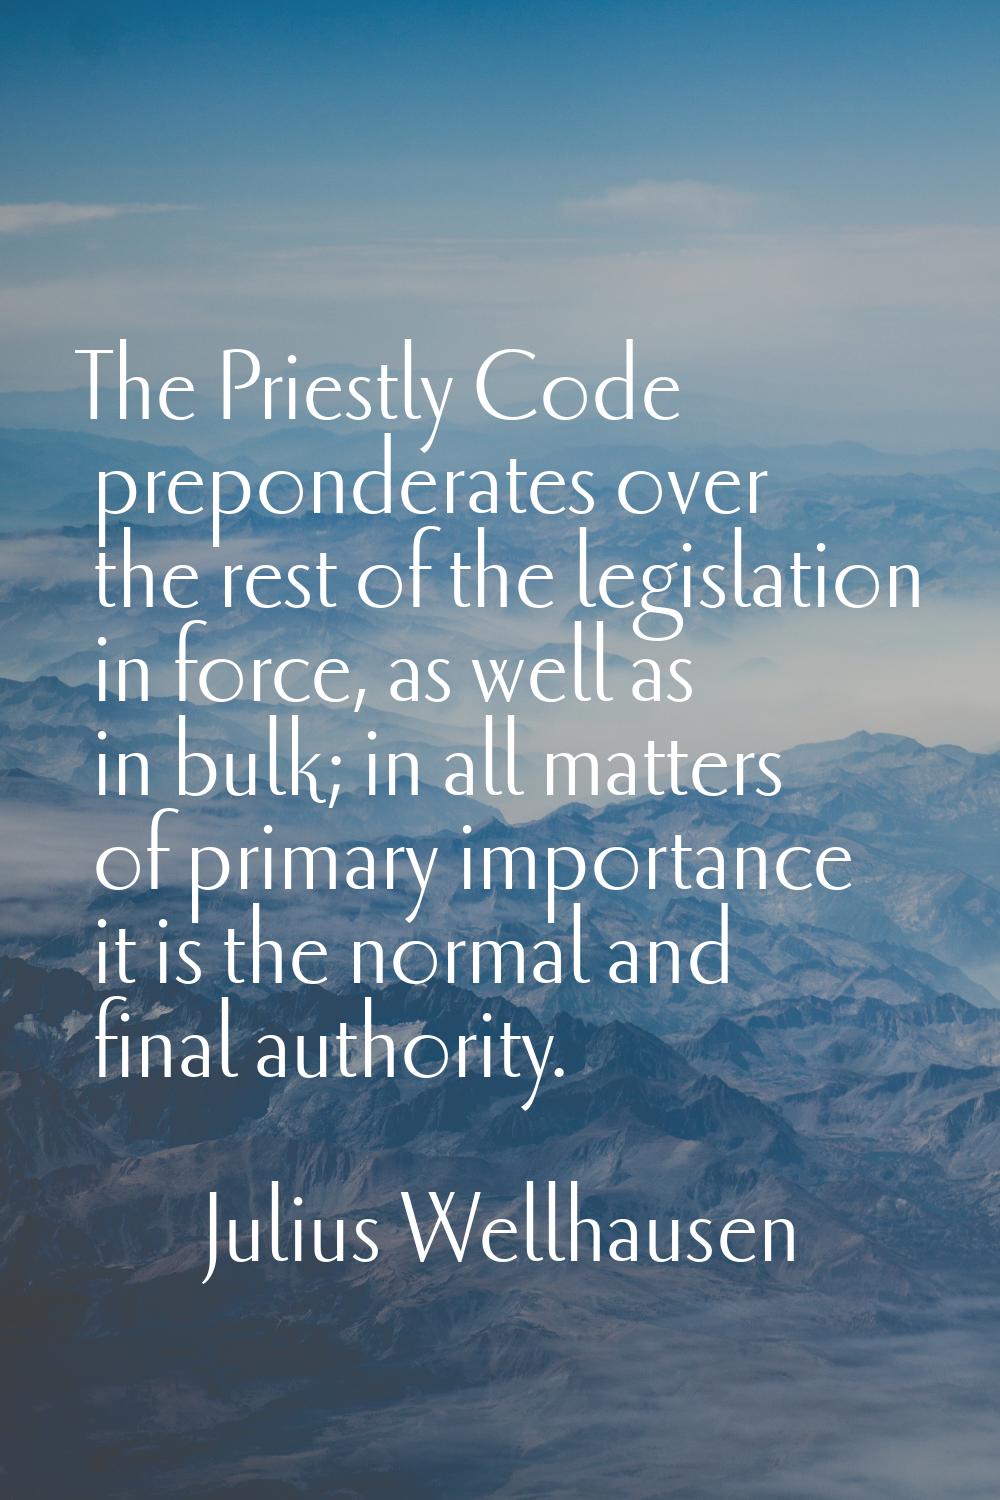 The Priestly Code preponderates over the rest of the legislation in force, as well as in bulk; in a